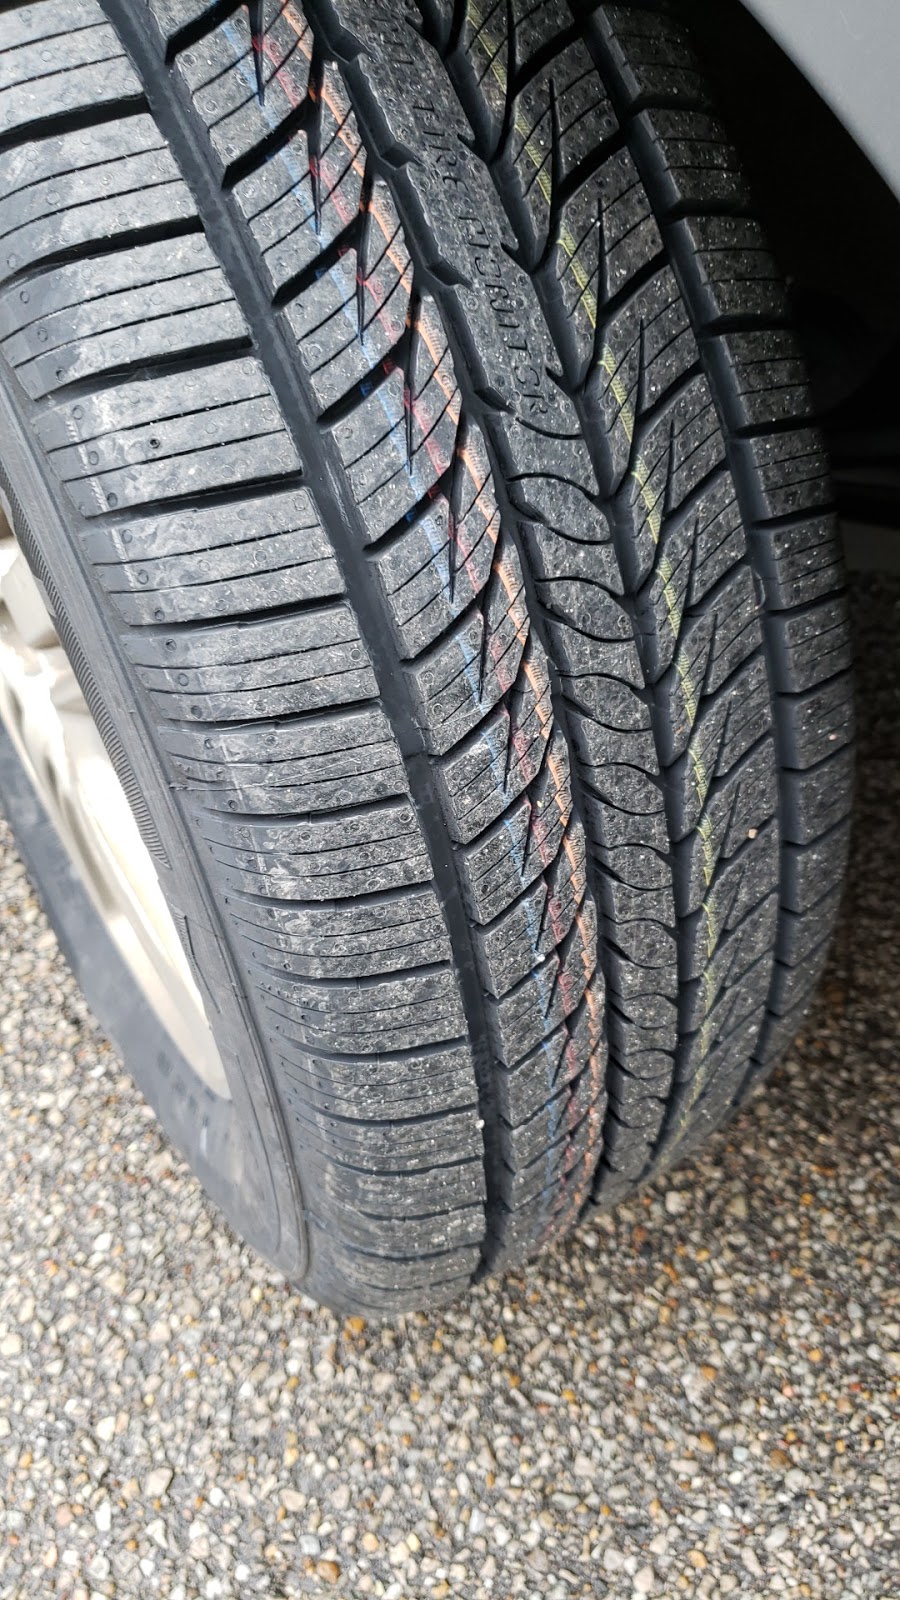 Raleigh Tire Service | 6902 Goodman Rd, Olive Branch, MS 38654 | Phone: (662) 890-9545